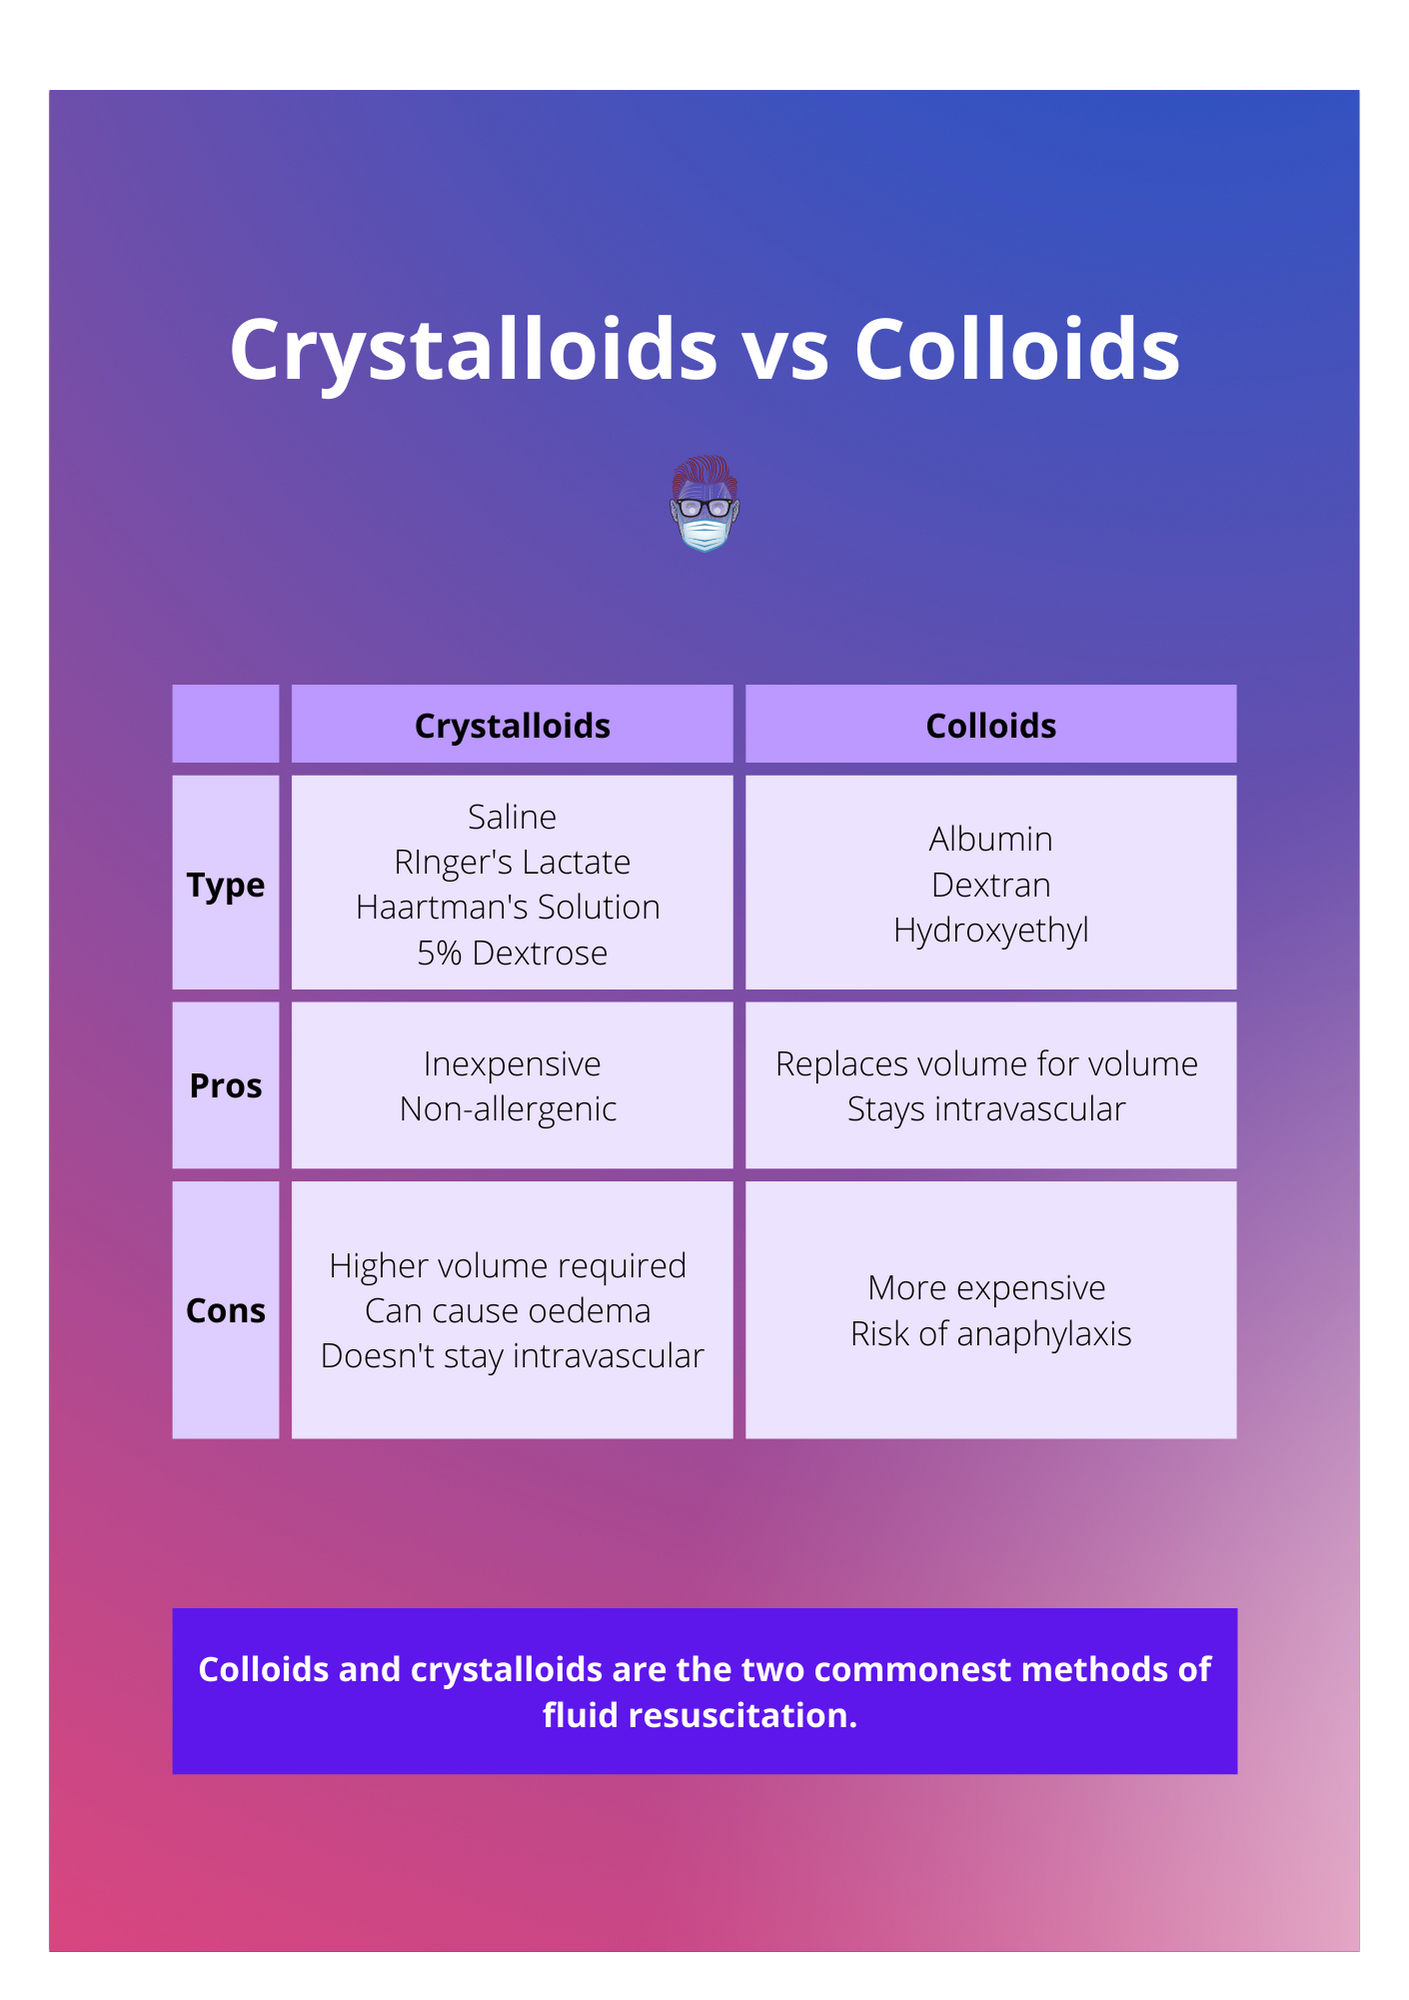 A table comparing the differences in crystalloid and colloids for fluid resuscitation and their advantages and disadvantages